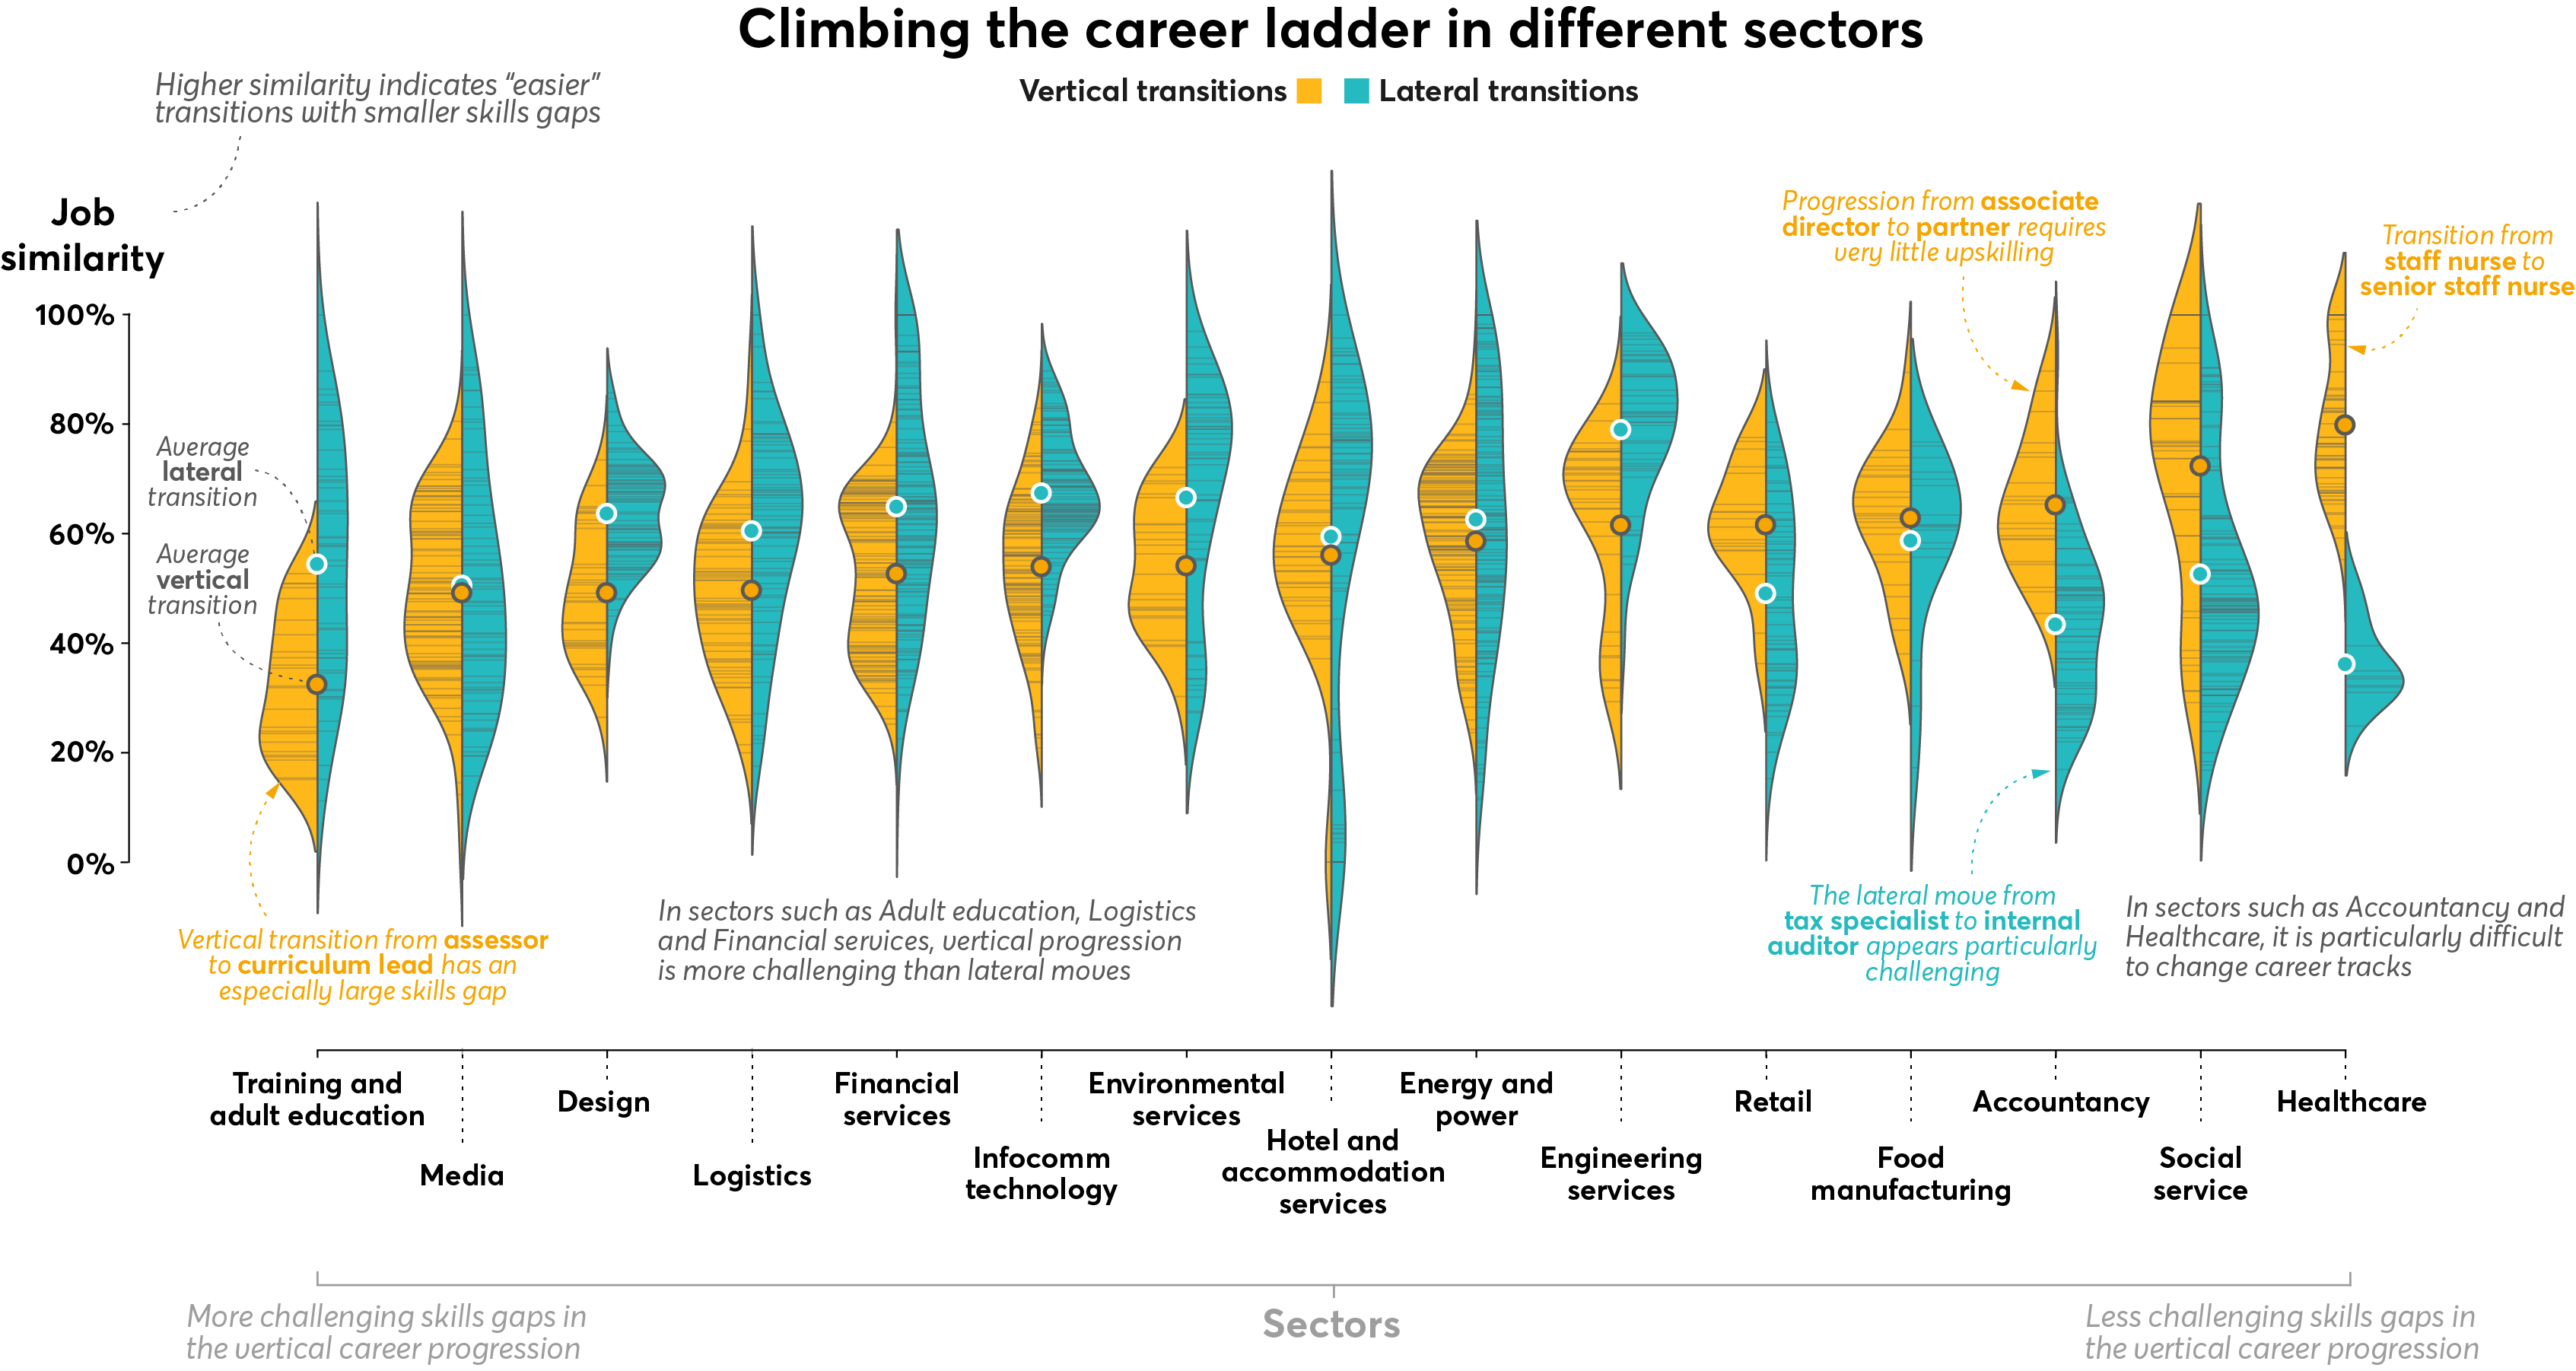 A chart showing the ease of vertical and lateral transitions in different sectors